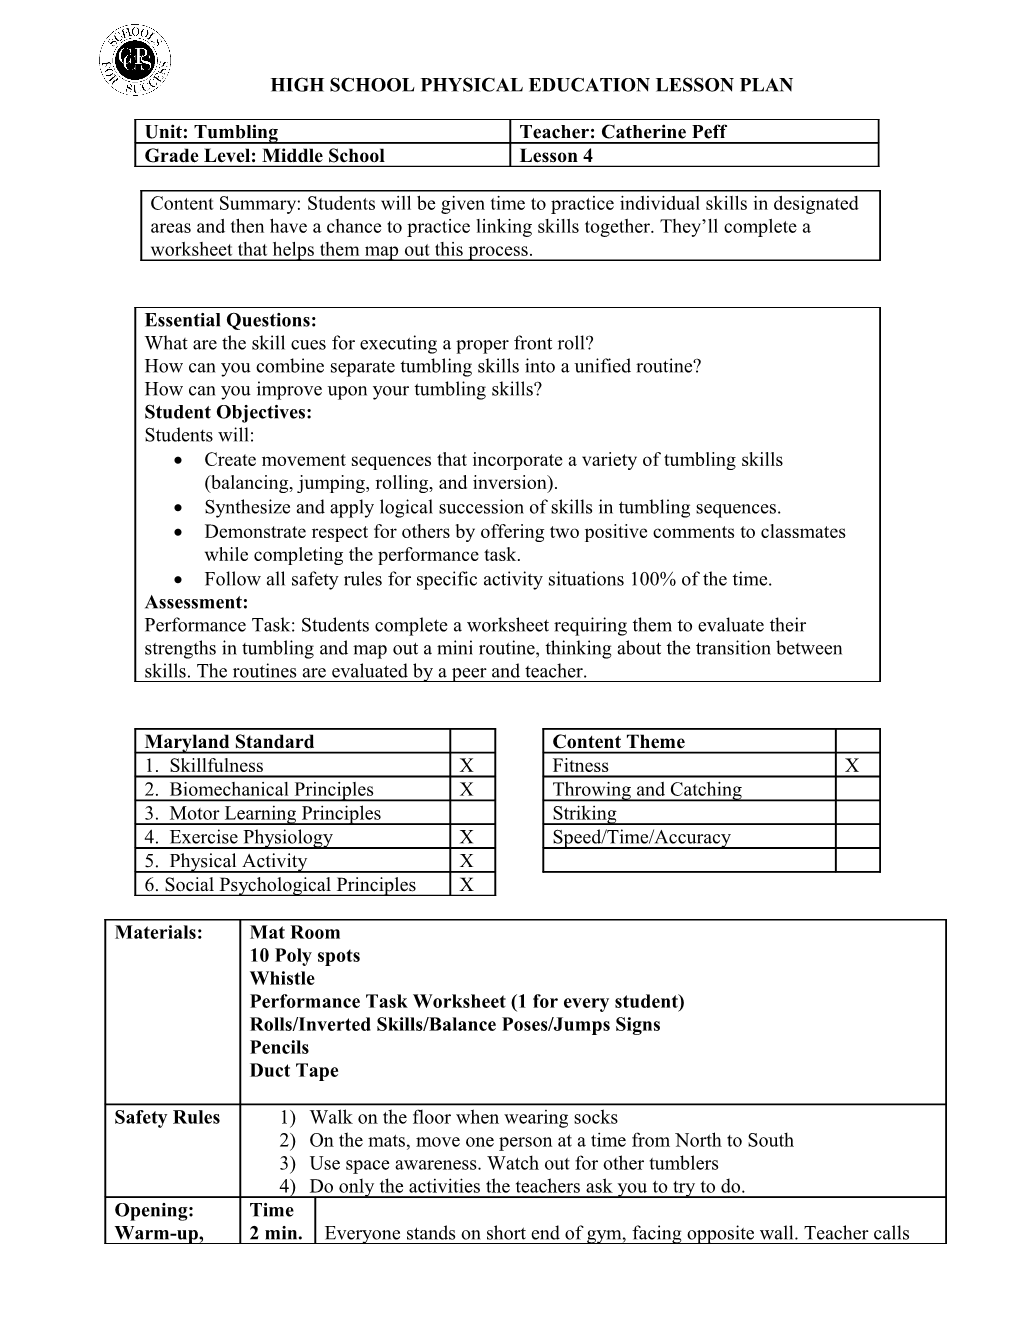 Elementary Physical Education Lesson Plan